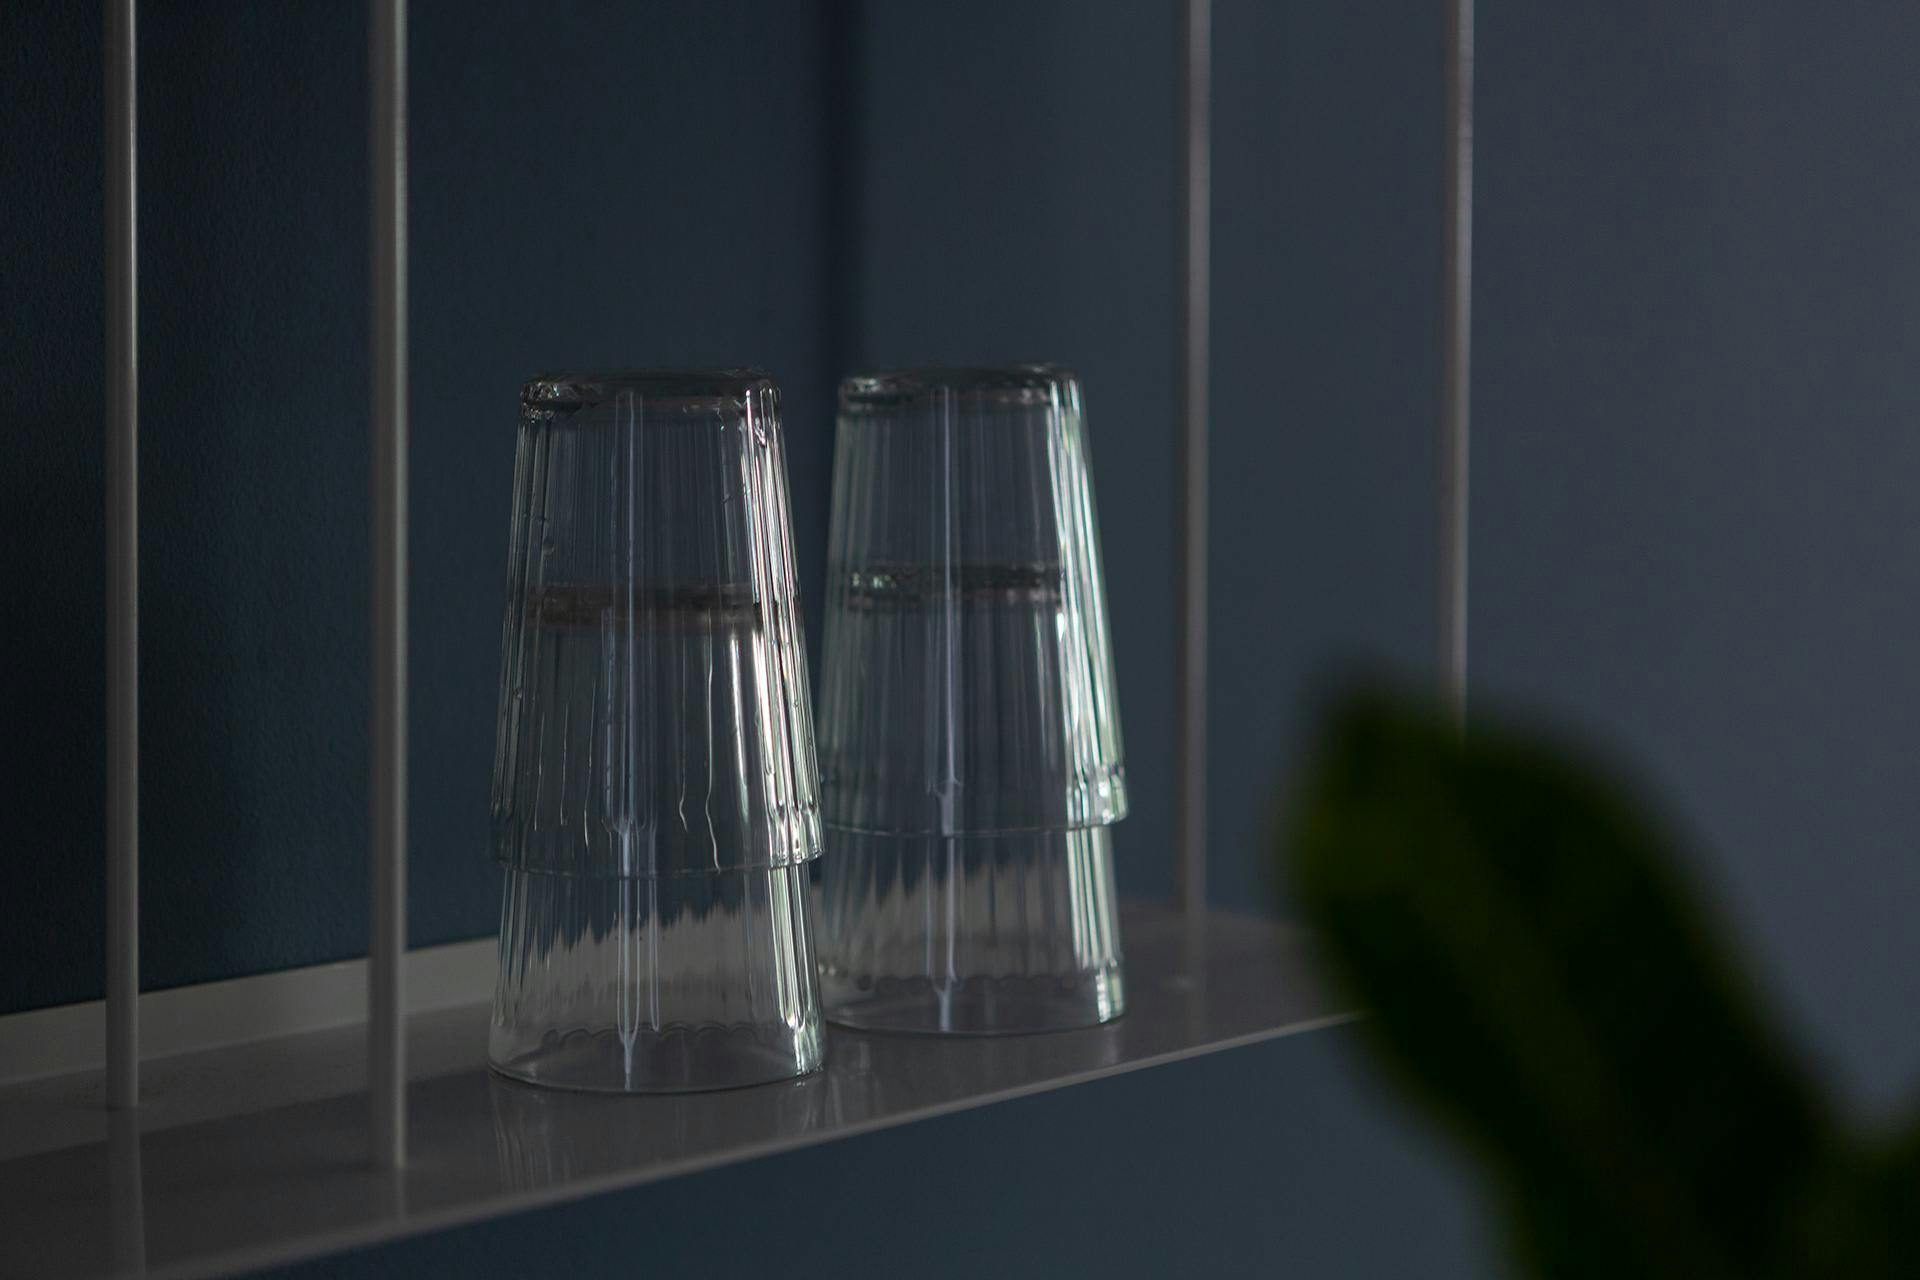 The image features a white shelf with a row of clear glass vases or jars lined up against the wall. There are four vases in total, each with a unique shape and size. The vases are arranged in a neat and organized manner, creating an aesthetically pleasing display. The clear glass vases are placed close together, adding a sense of harmony and balance to the arrangement.